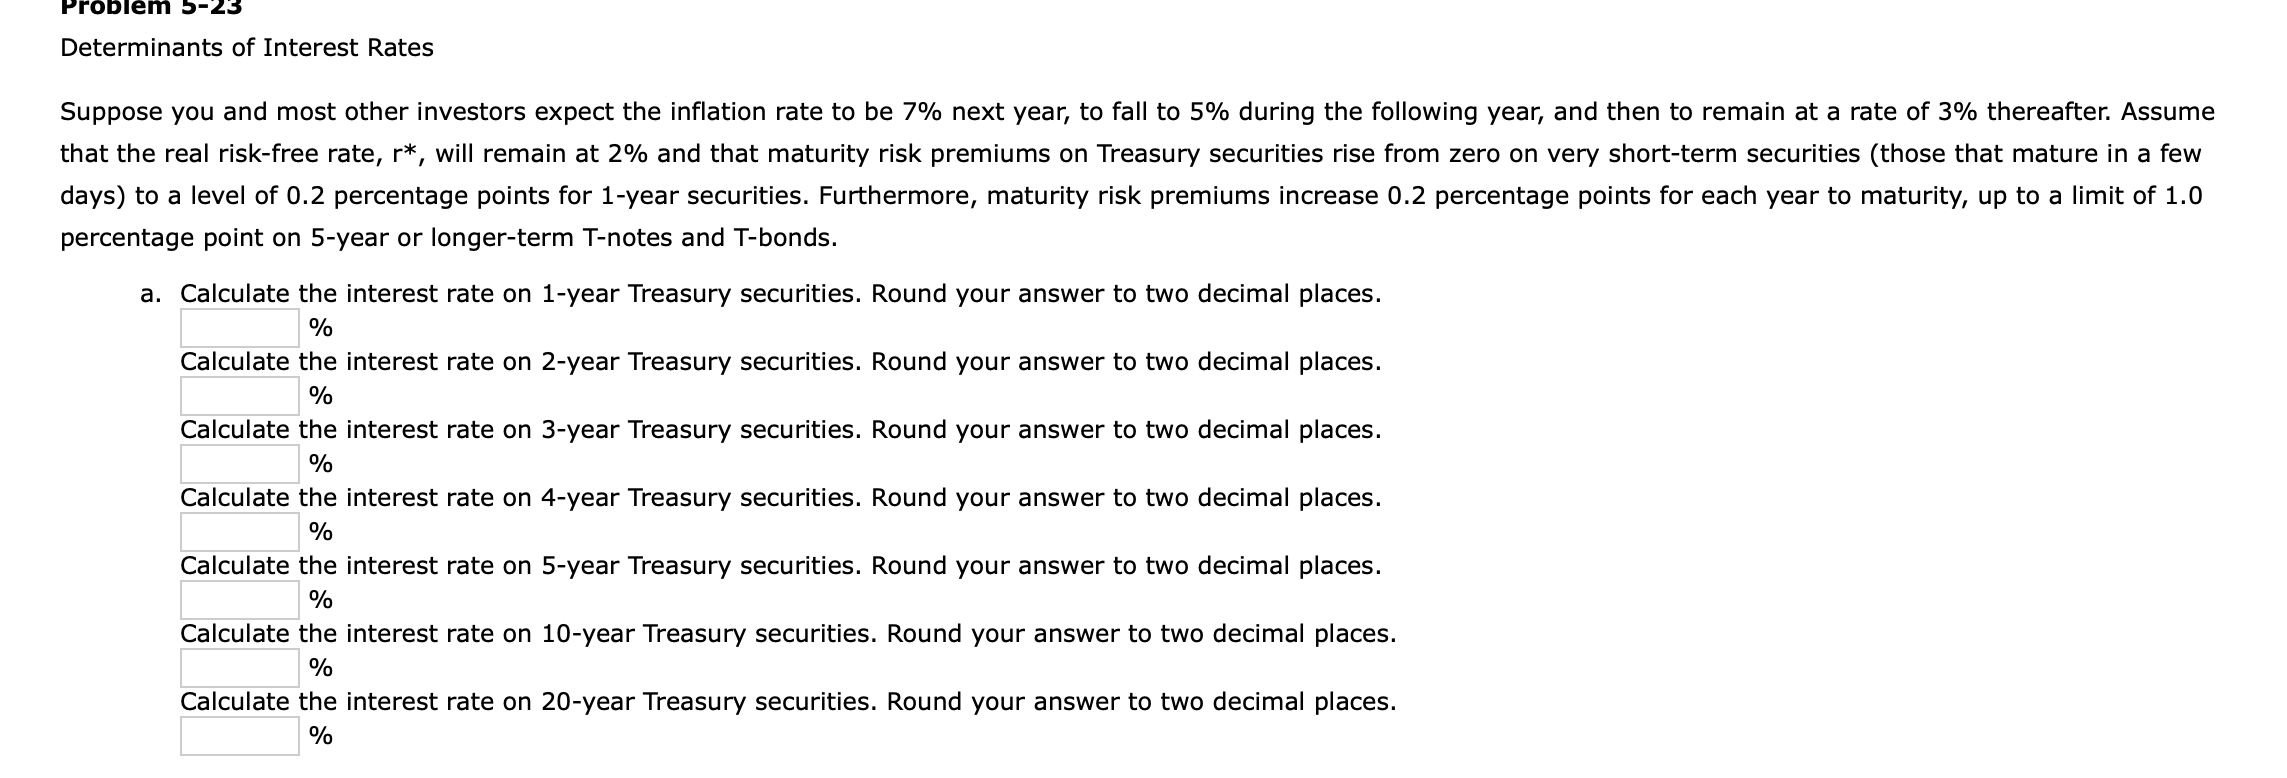 Determinants of Interest Rates
Suppose you and most other investors expect the inflation rate to be 7% next year, to fall to 5% during the following year, and then to remain at a rate of 3% thereafter. Assume
that the real risk-free rate, r*, will remain at 2% and that maturity risk premiums on Treasury securities rise from zero on very short-term securities (those that mature in a few
days) to a level of 0.2 percentage points for 1-year securities. Furthermore, maturity risk premiums increase 0.2 percentage points for each year to maturity, up to a limit of 1.0
percentage point on 5-year or longer-term T-notes and T-bonds.
a. Calculate the interest rate on 1-year Treasury securities. Round your answer to two decimal places.
%
Calculate the interest rate on 2-year Treasury securities. Round your answer to two decimal places.
%
Calculate the interest rate on 3-year Treasury securities. Round your answer to two decimal places.
Calculate the interest rate on 4-year Treasury securities. Round your answer to two decimal places.
%
Calculate the interest rate on 5-year Treasury securities. Round your answer to two decimal places.
%
Calculate the interest rate on 10-year Treasury securities. Round your answer to two decimal places.
%
Calculate the interest rate on 20-year Treasury securities. Round your answer to two decimal places.
%
